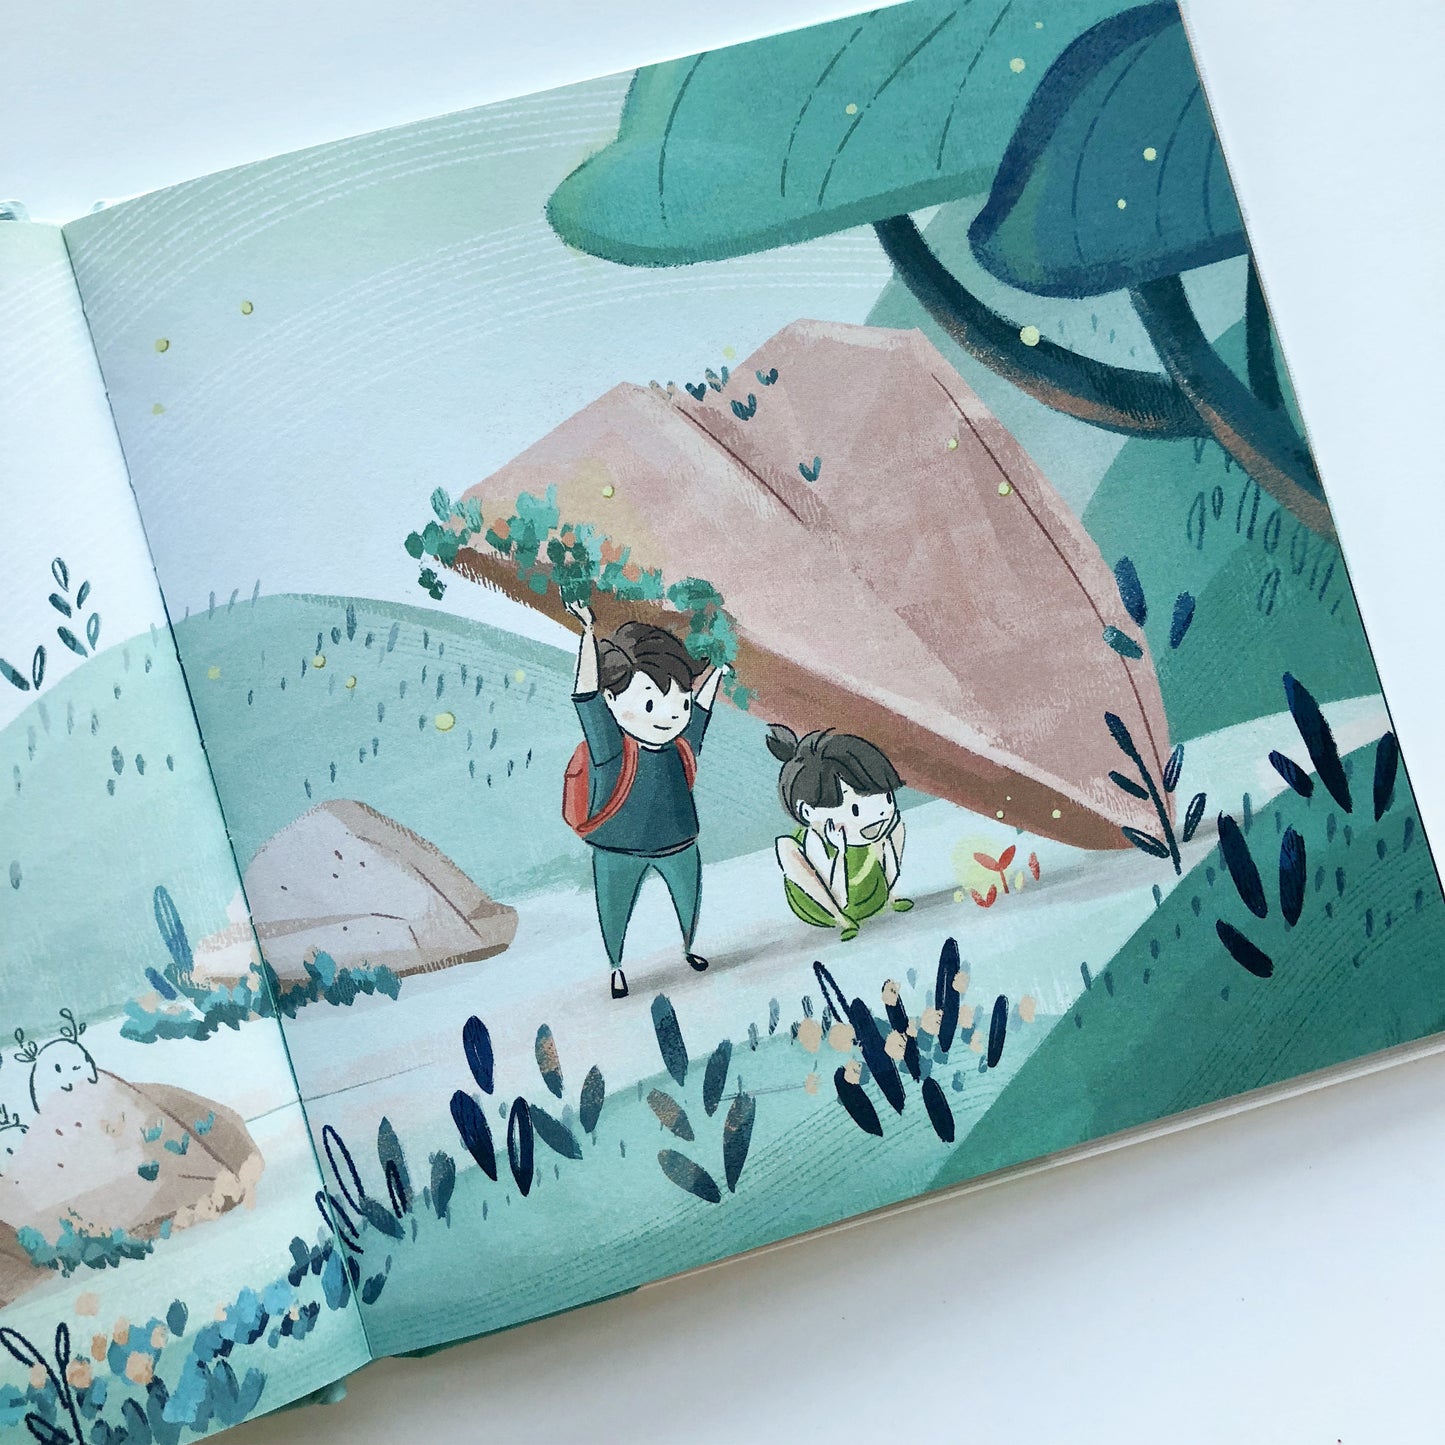  Inspirational nature illustration of boy and girl on an adventure, from Let's Go Explore by Mimochai